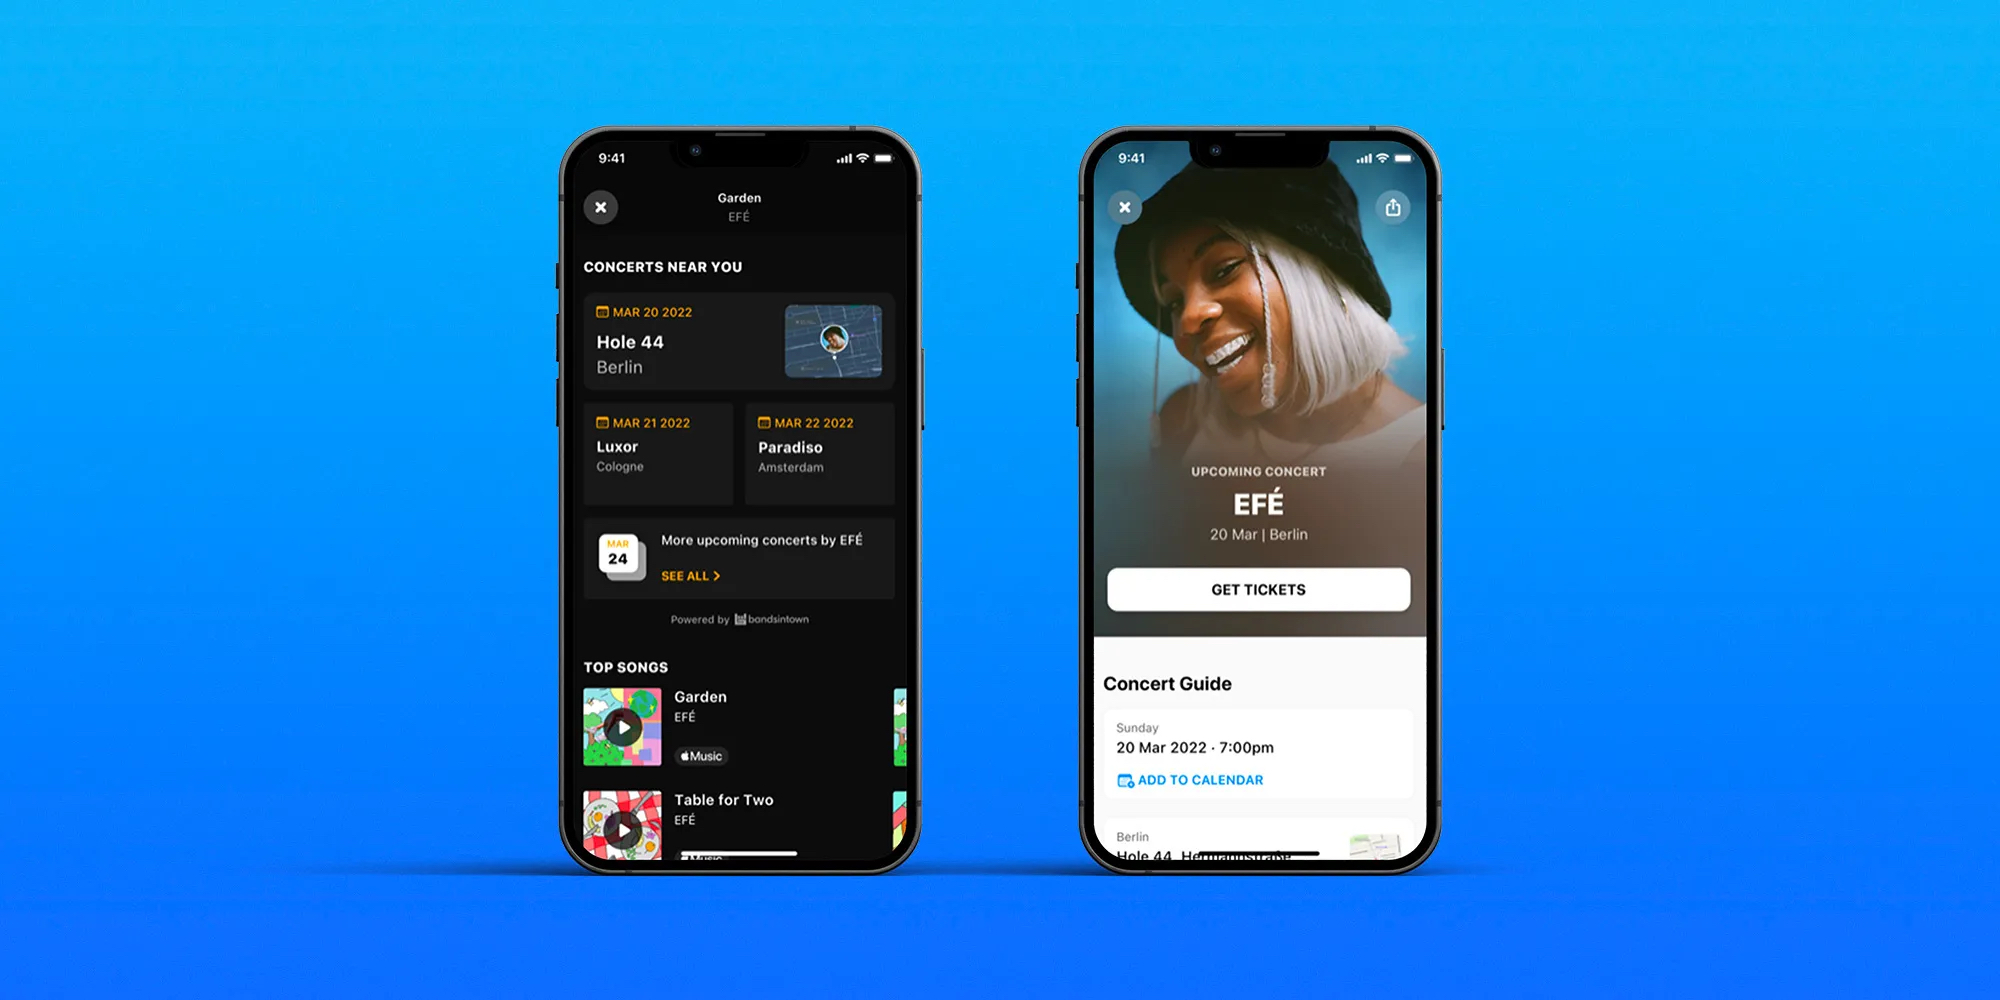 Find music events near me with new Shazam app update